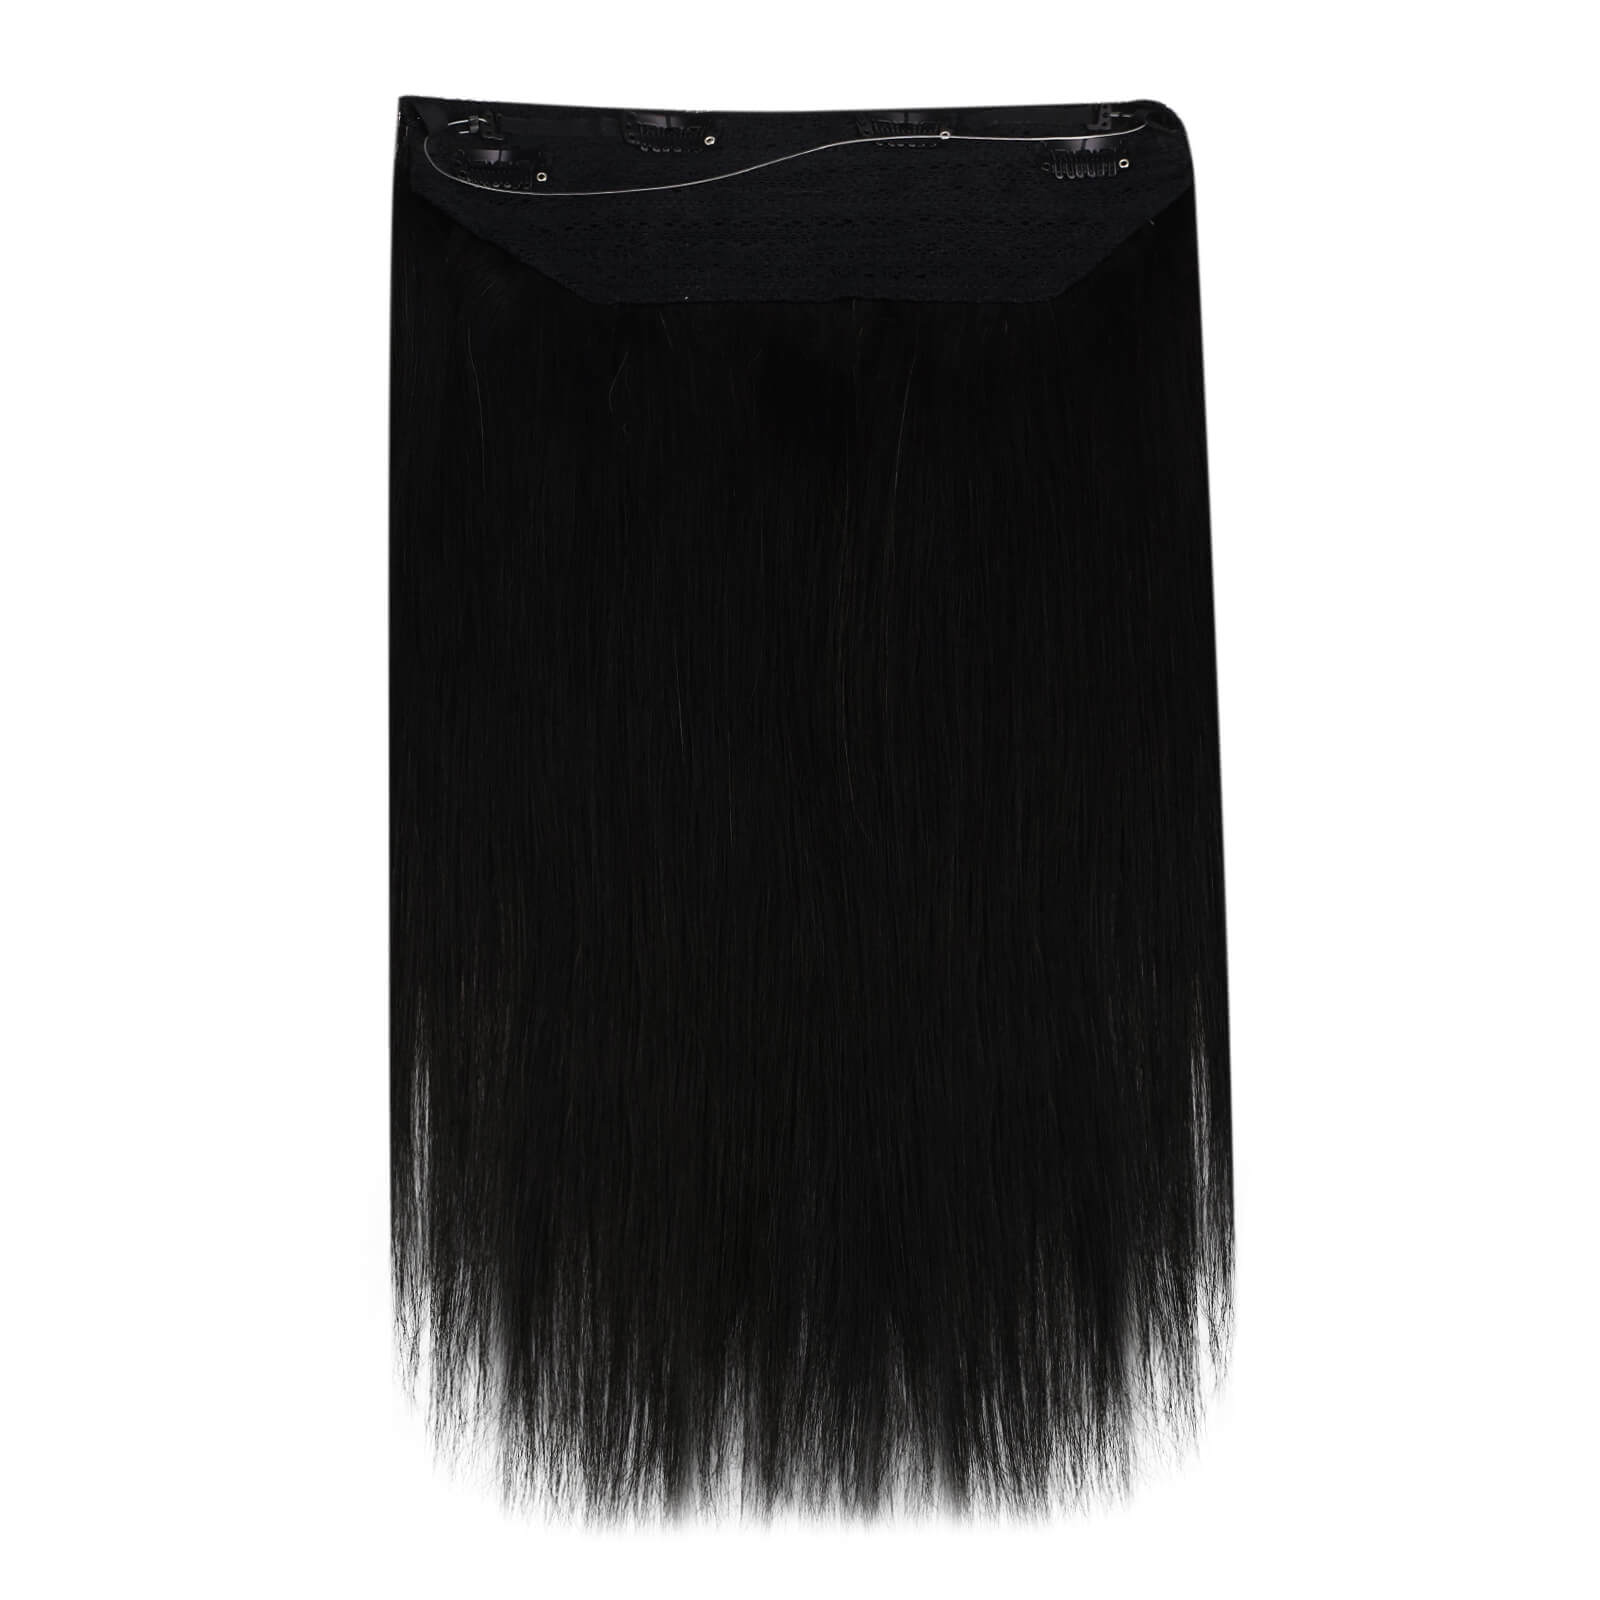 Halos Hair Extensions for Black Women